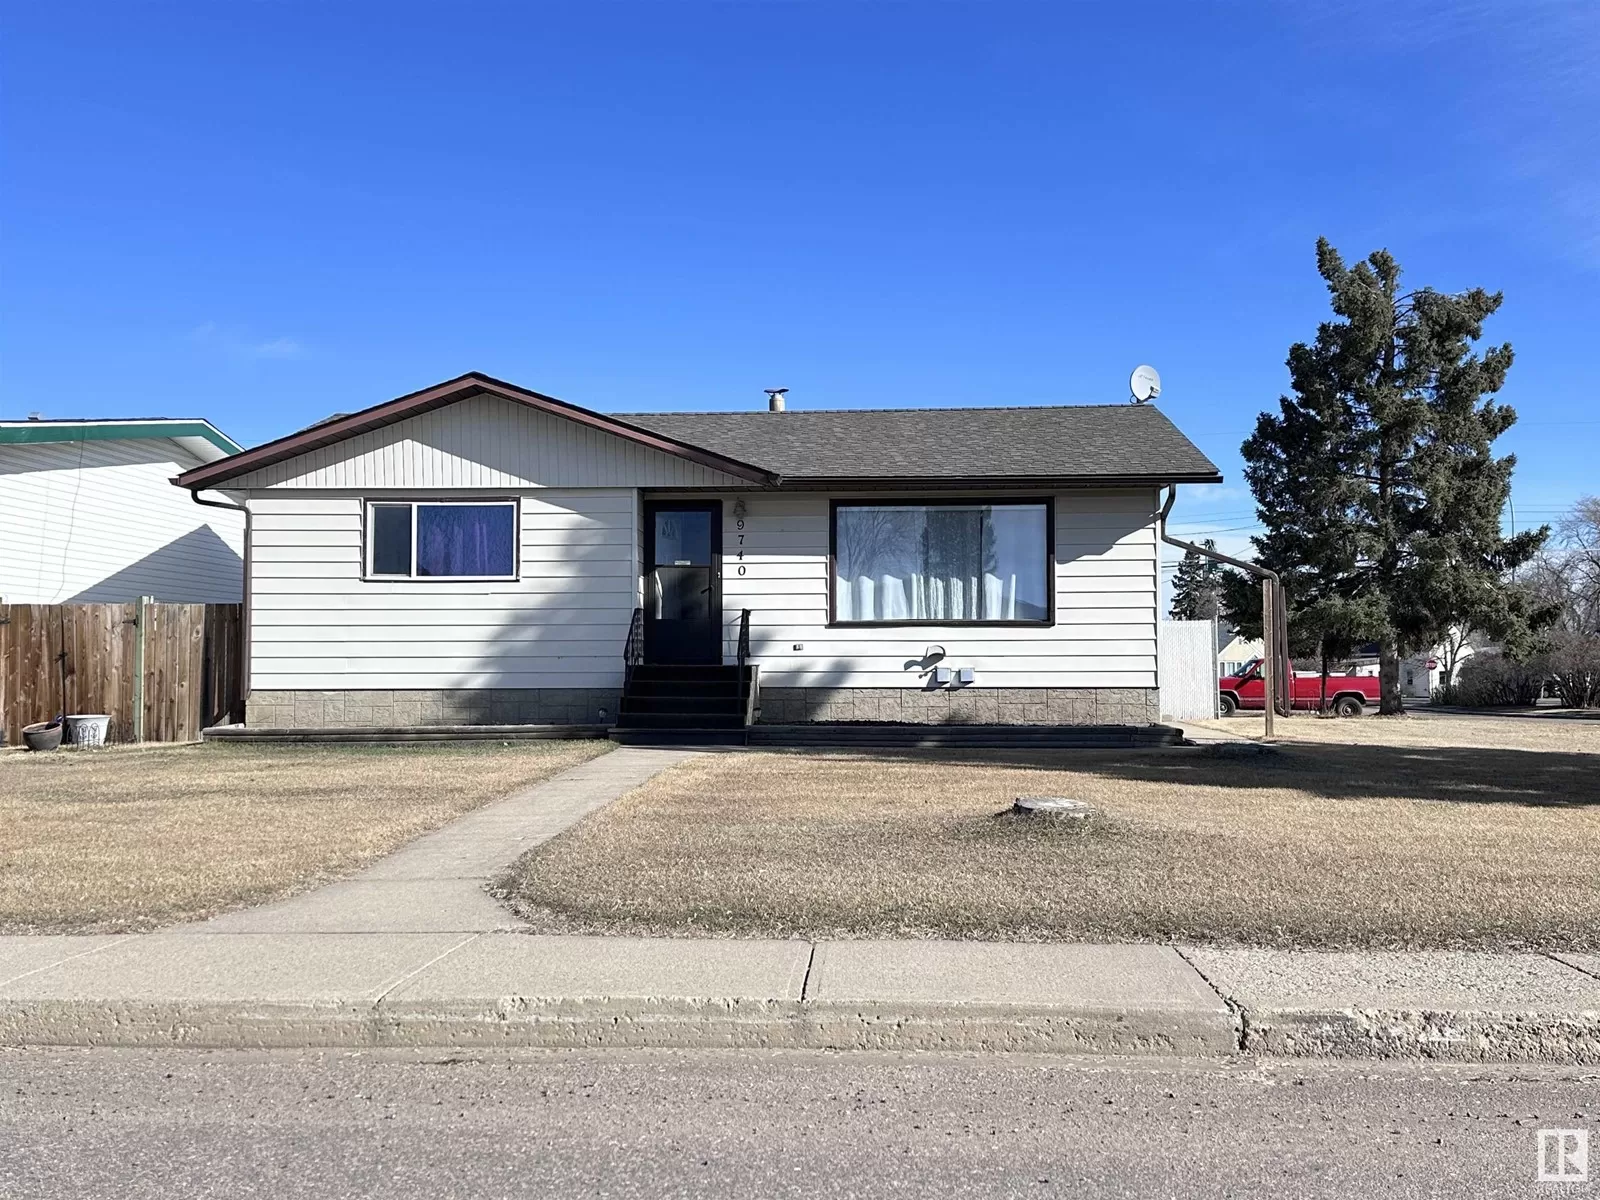 House for rent: 9740 99 St, Westlock, Alberta T7P 1Y4